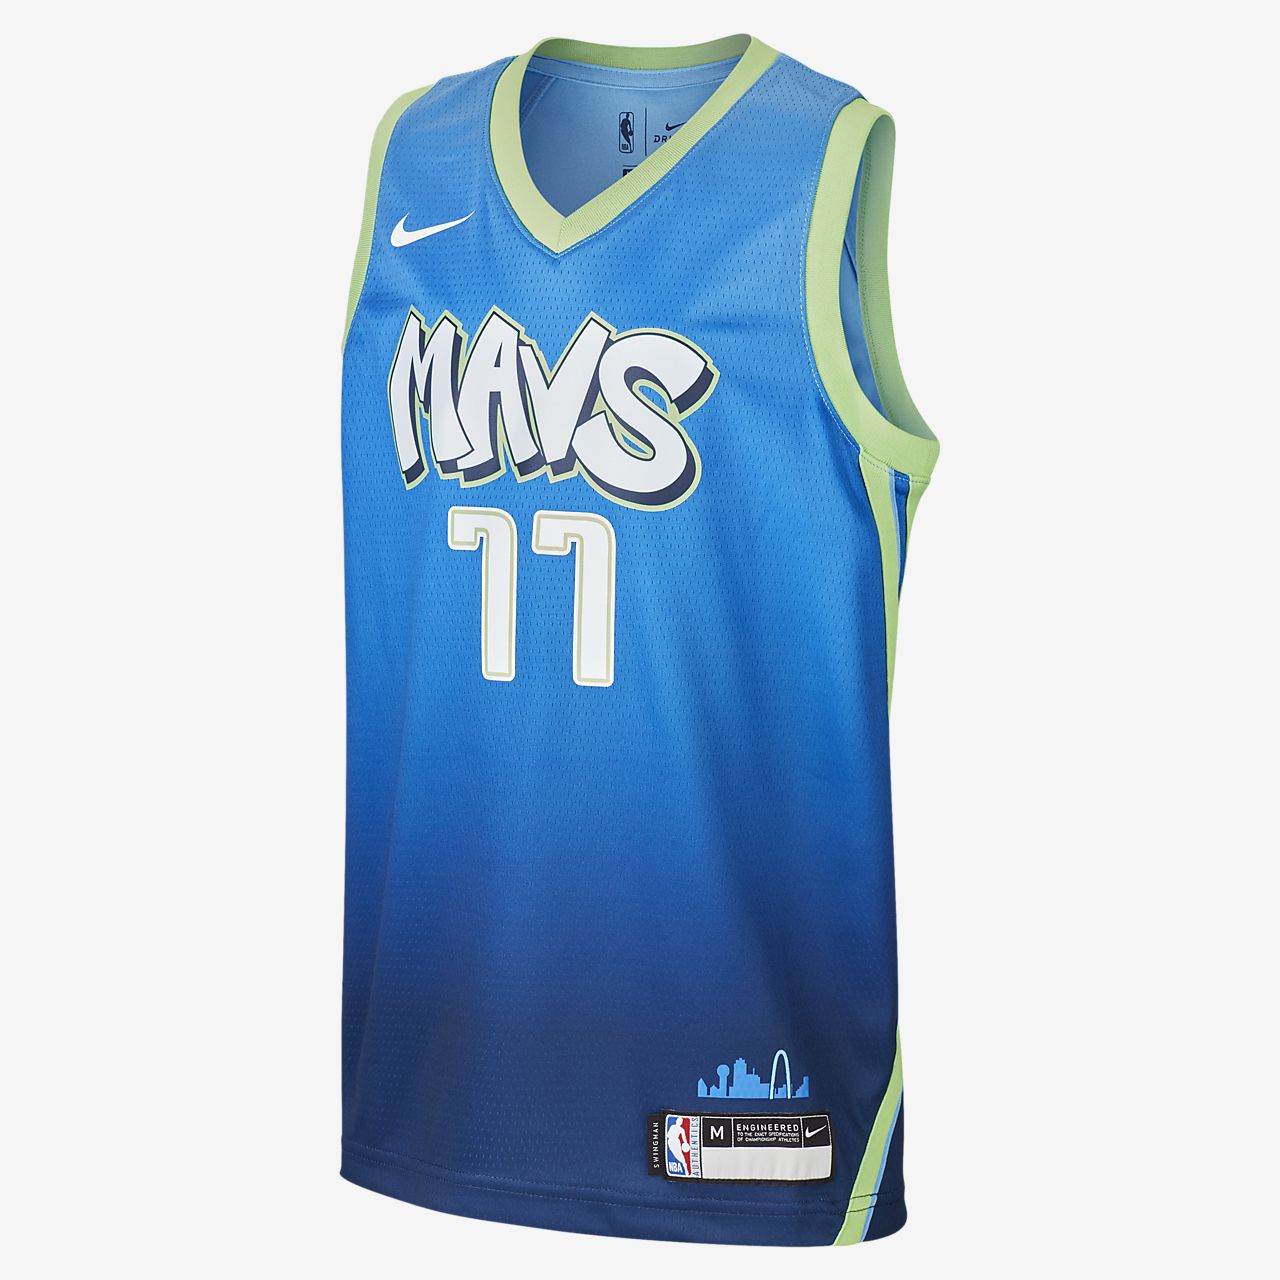 Luka Dončić Jersey : Free shipping on all orders.